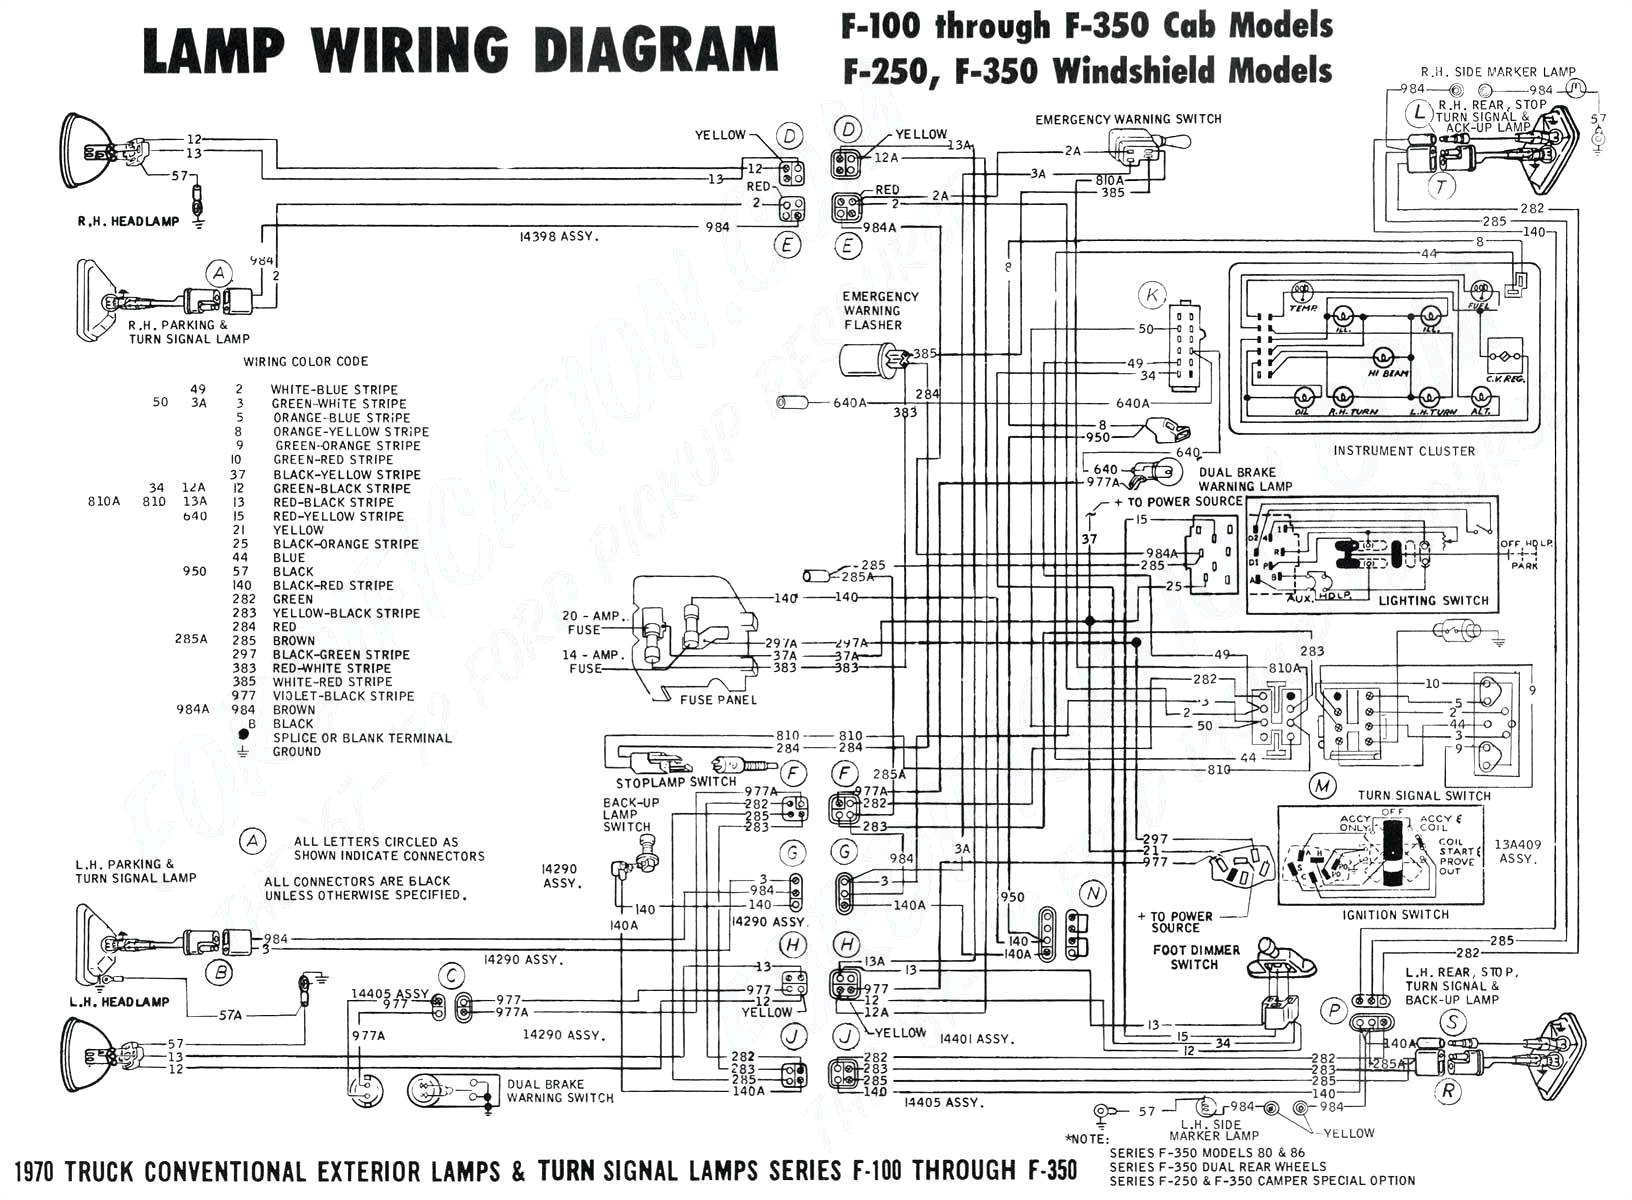 wiring diagram for 1997 vw cabrio cruisecontrol get free image about wiring diagram ame